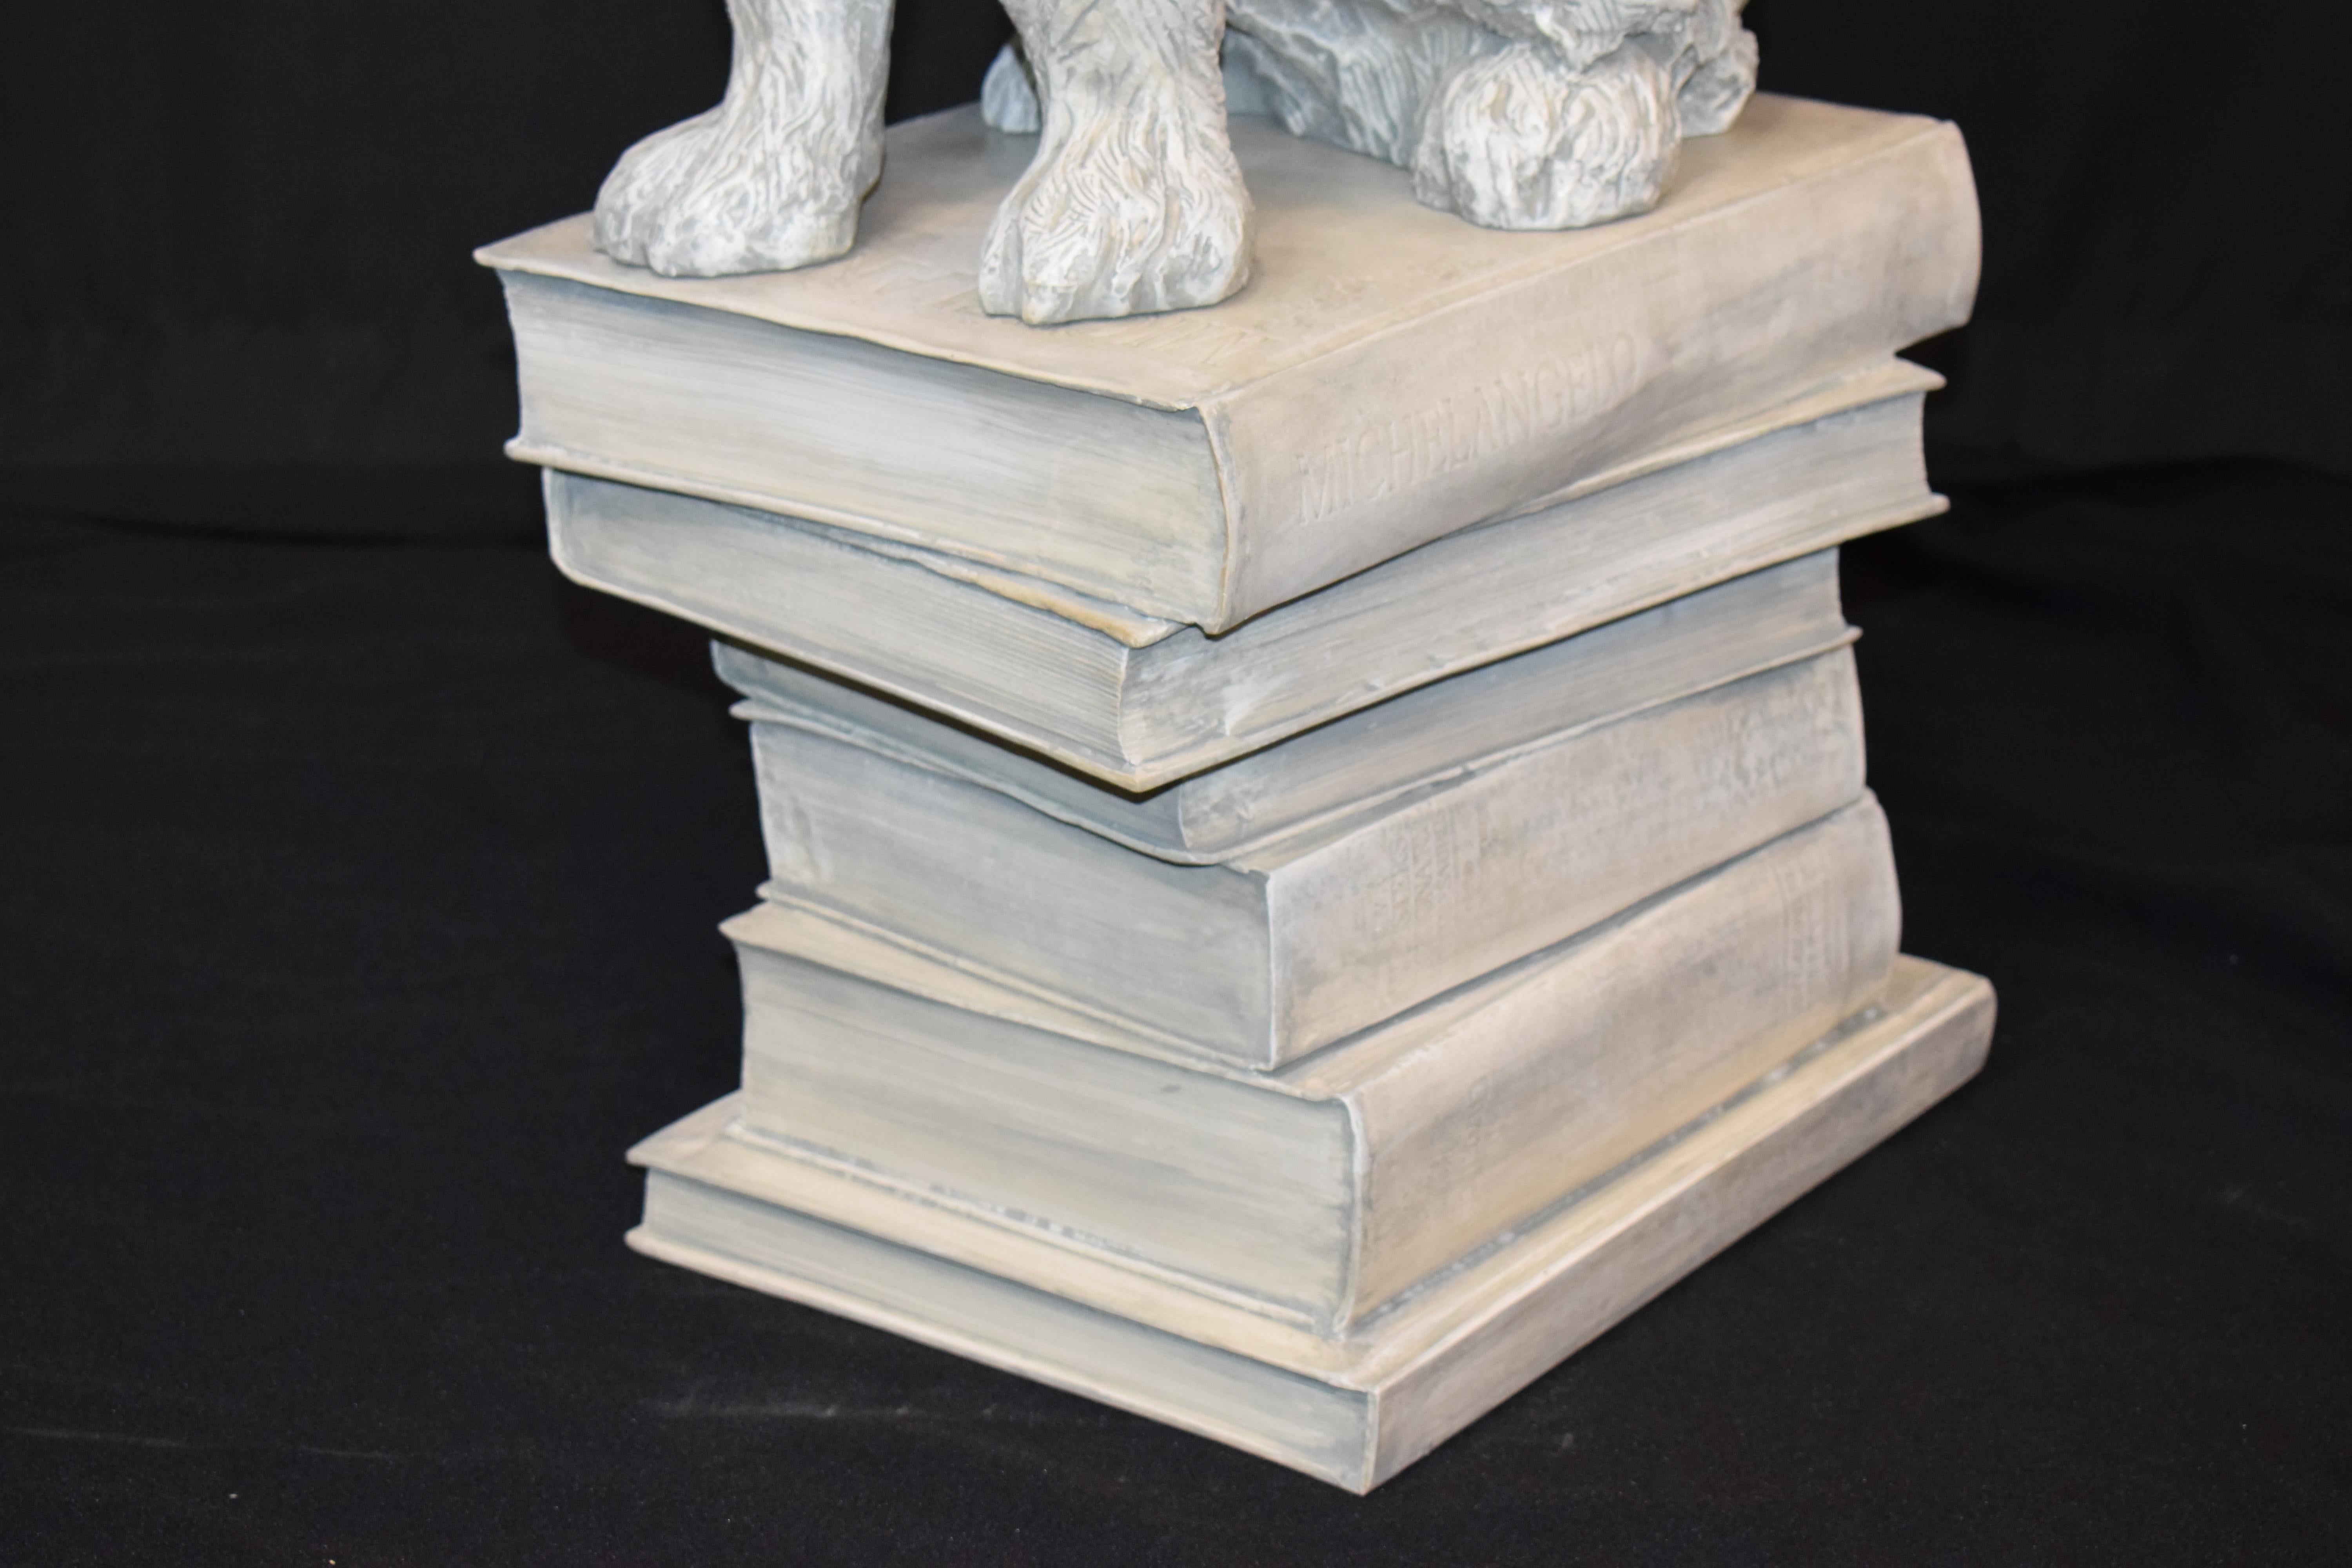 American Highly Decorative Full Size Sculpture of a Dog Sitting on Books For Sale